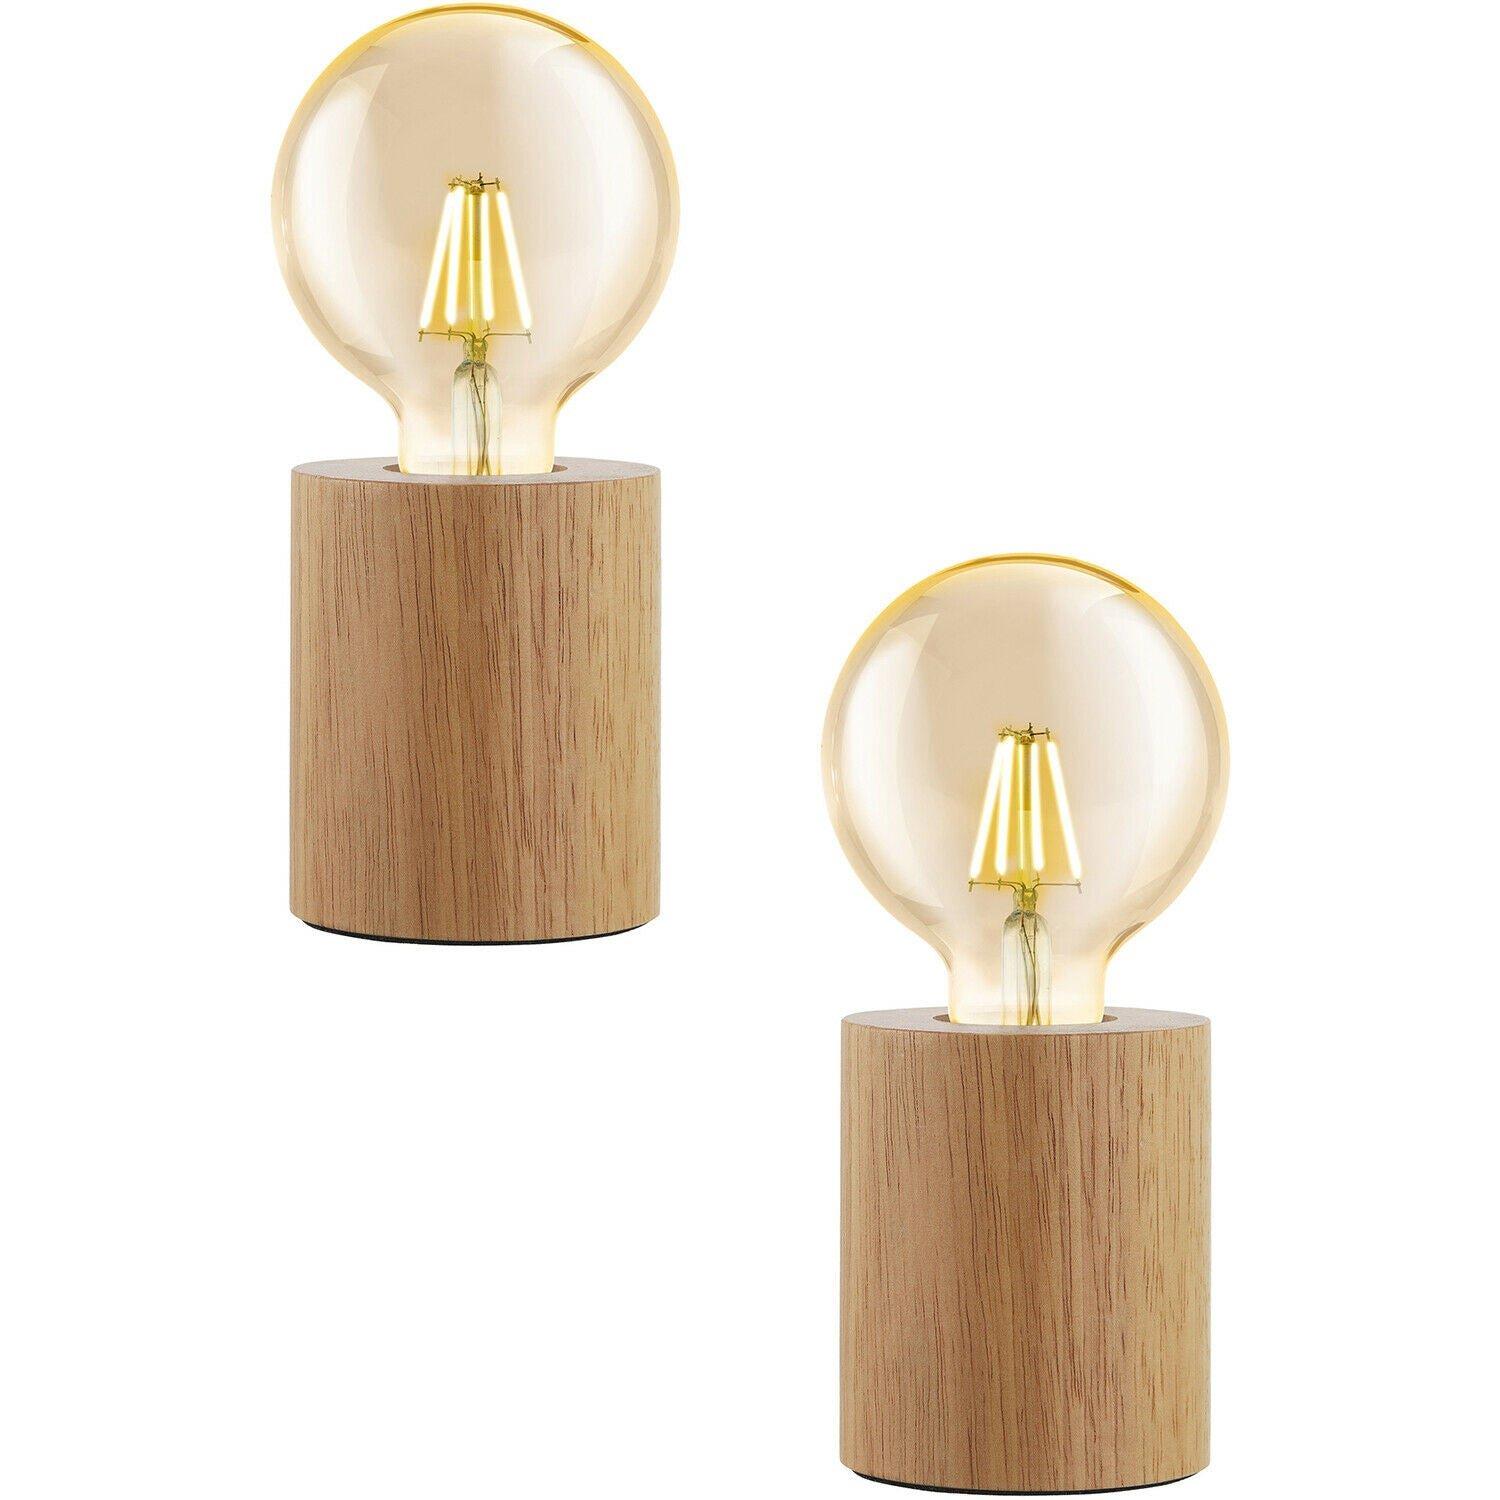 2 PACK Table Desk Lamp Simple Compact 1x Round Brown Wood Holder E27 28W